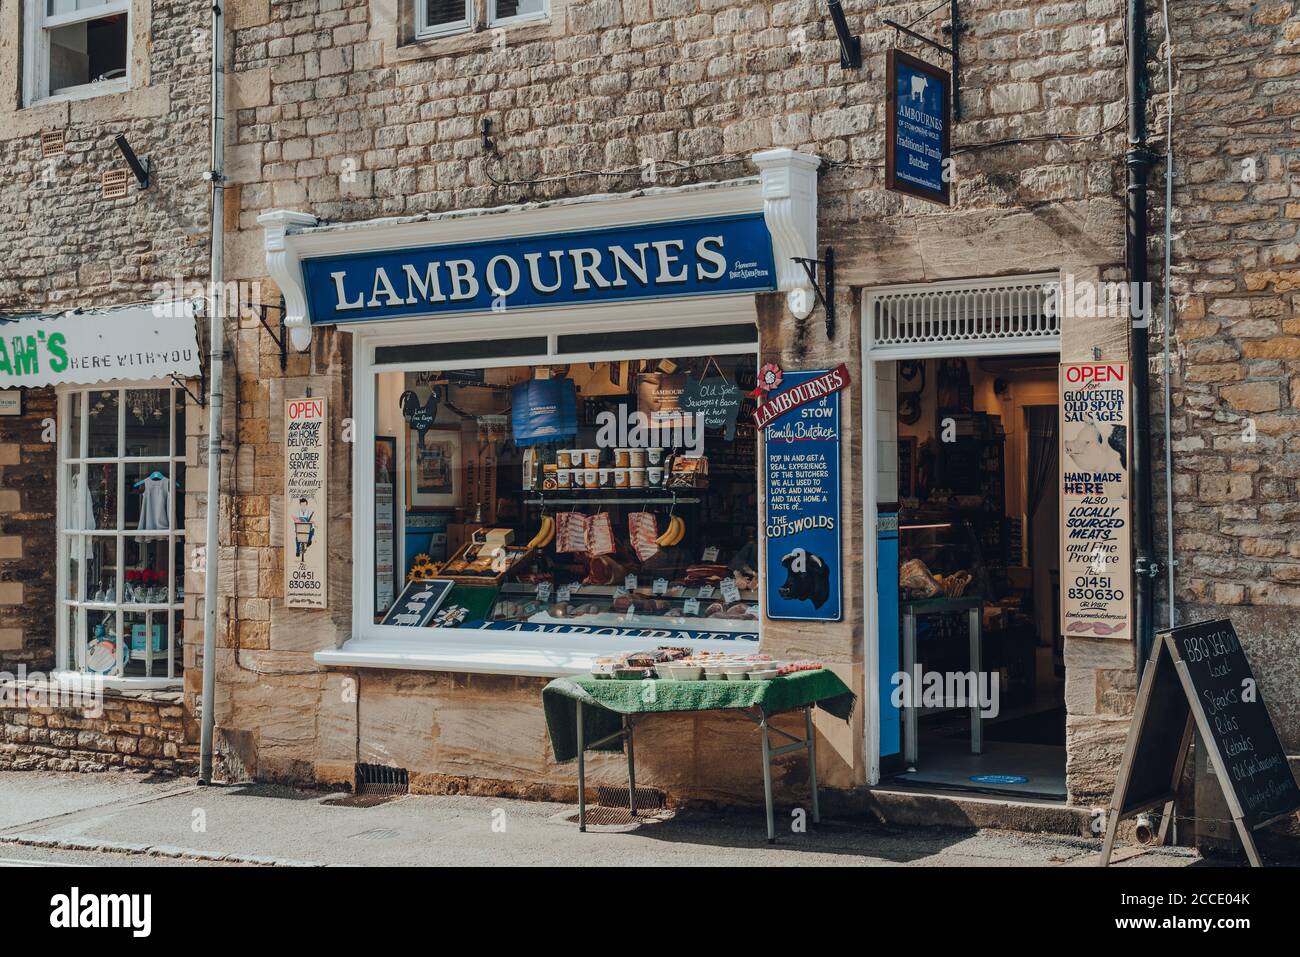 Stow-on-the-Wold, UK - July 10, 2020: Facade of Lambournes butcher shop in Stow-on-the-Wold, a market town in Cotswolds, UK, built on Roman Fosse Way. Stock Photo